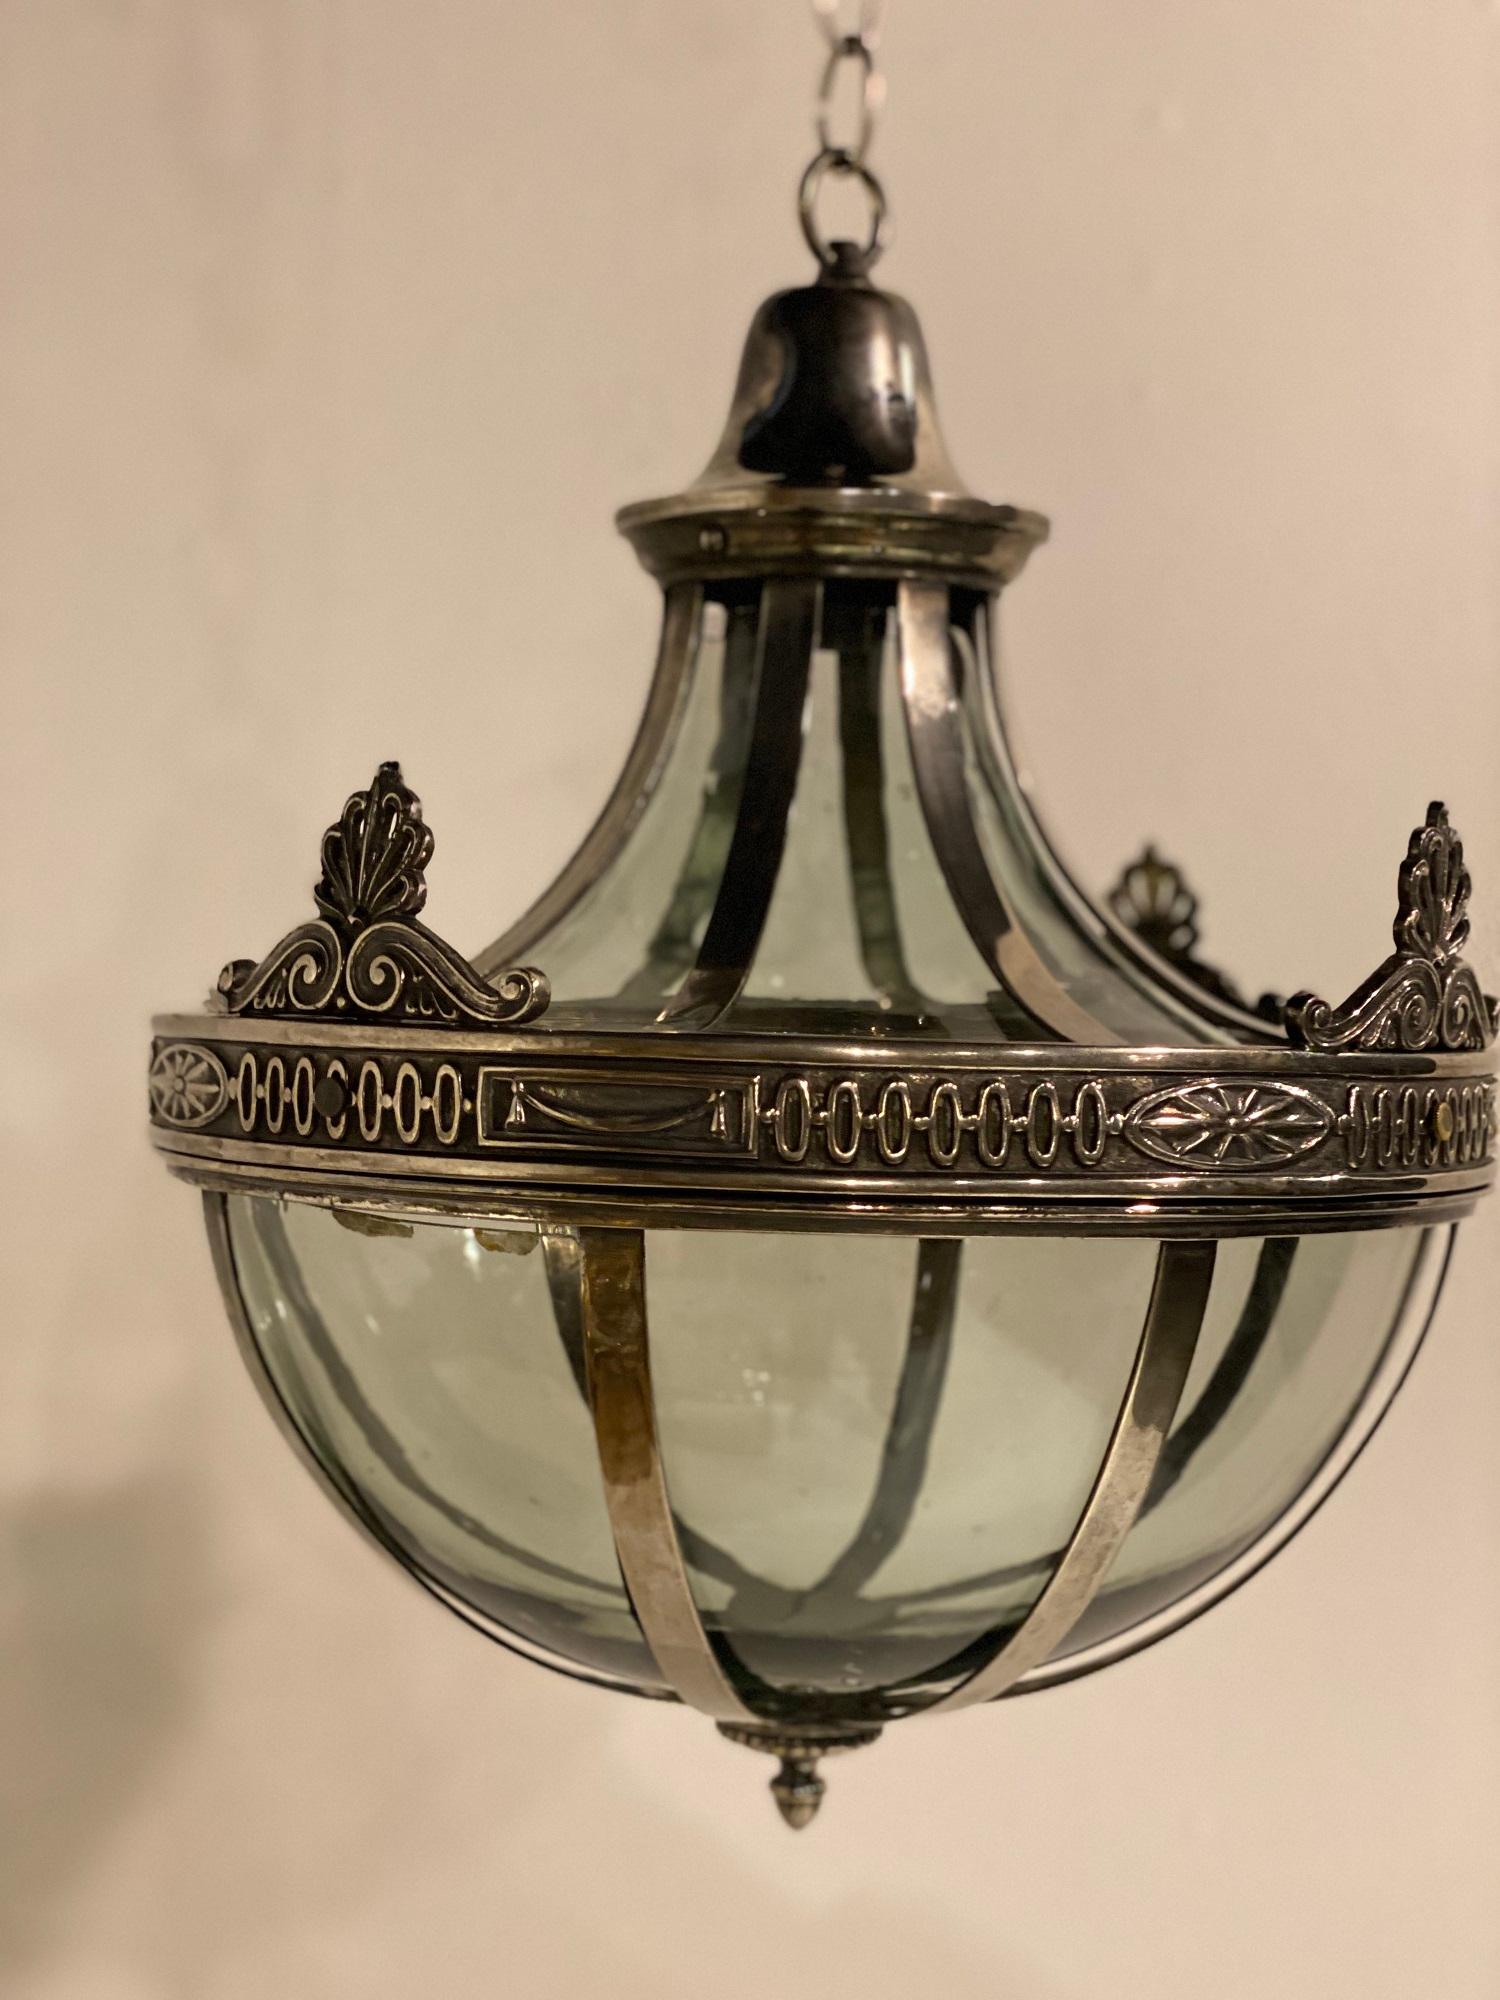 Neoclassical 1920s Caldwell Nickel Plated Light Fixture For Sale